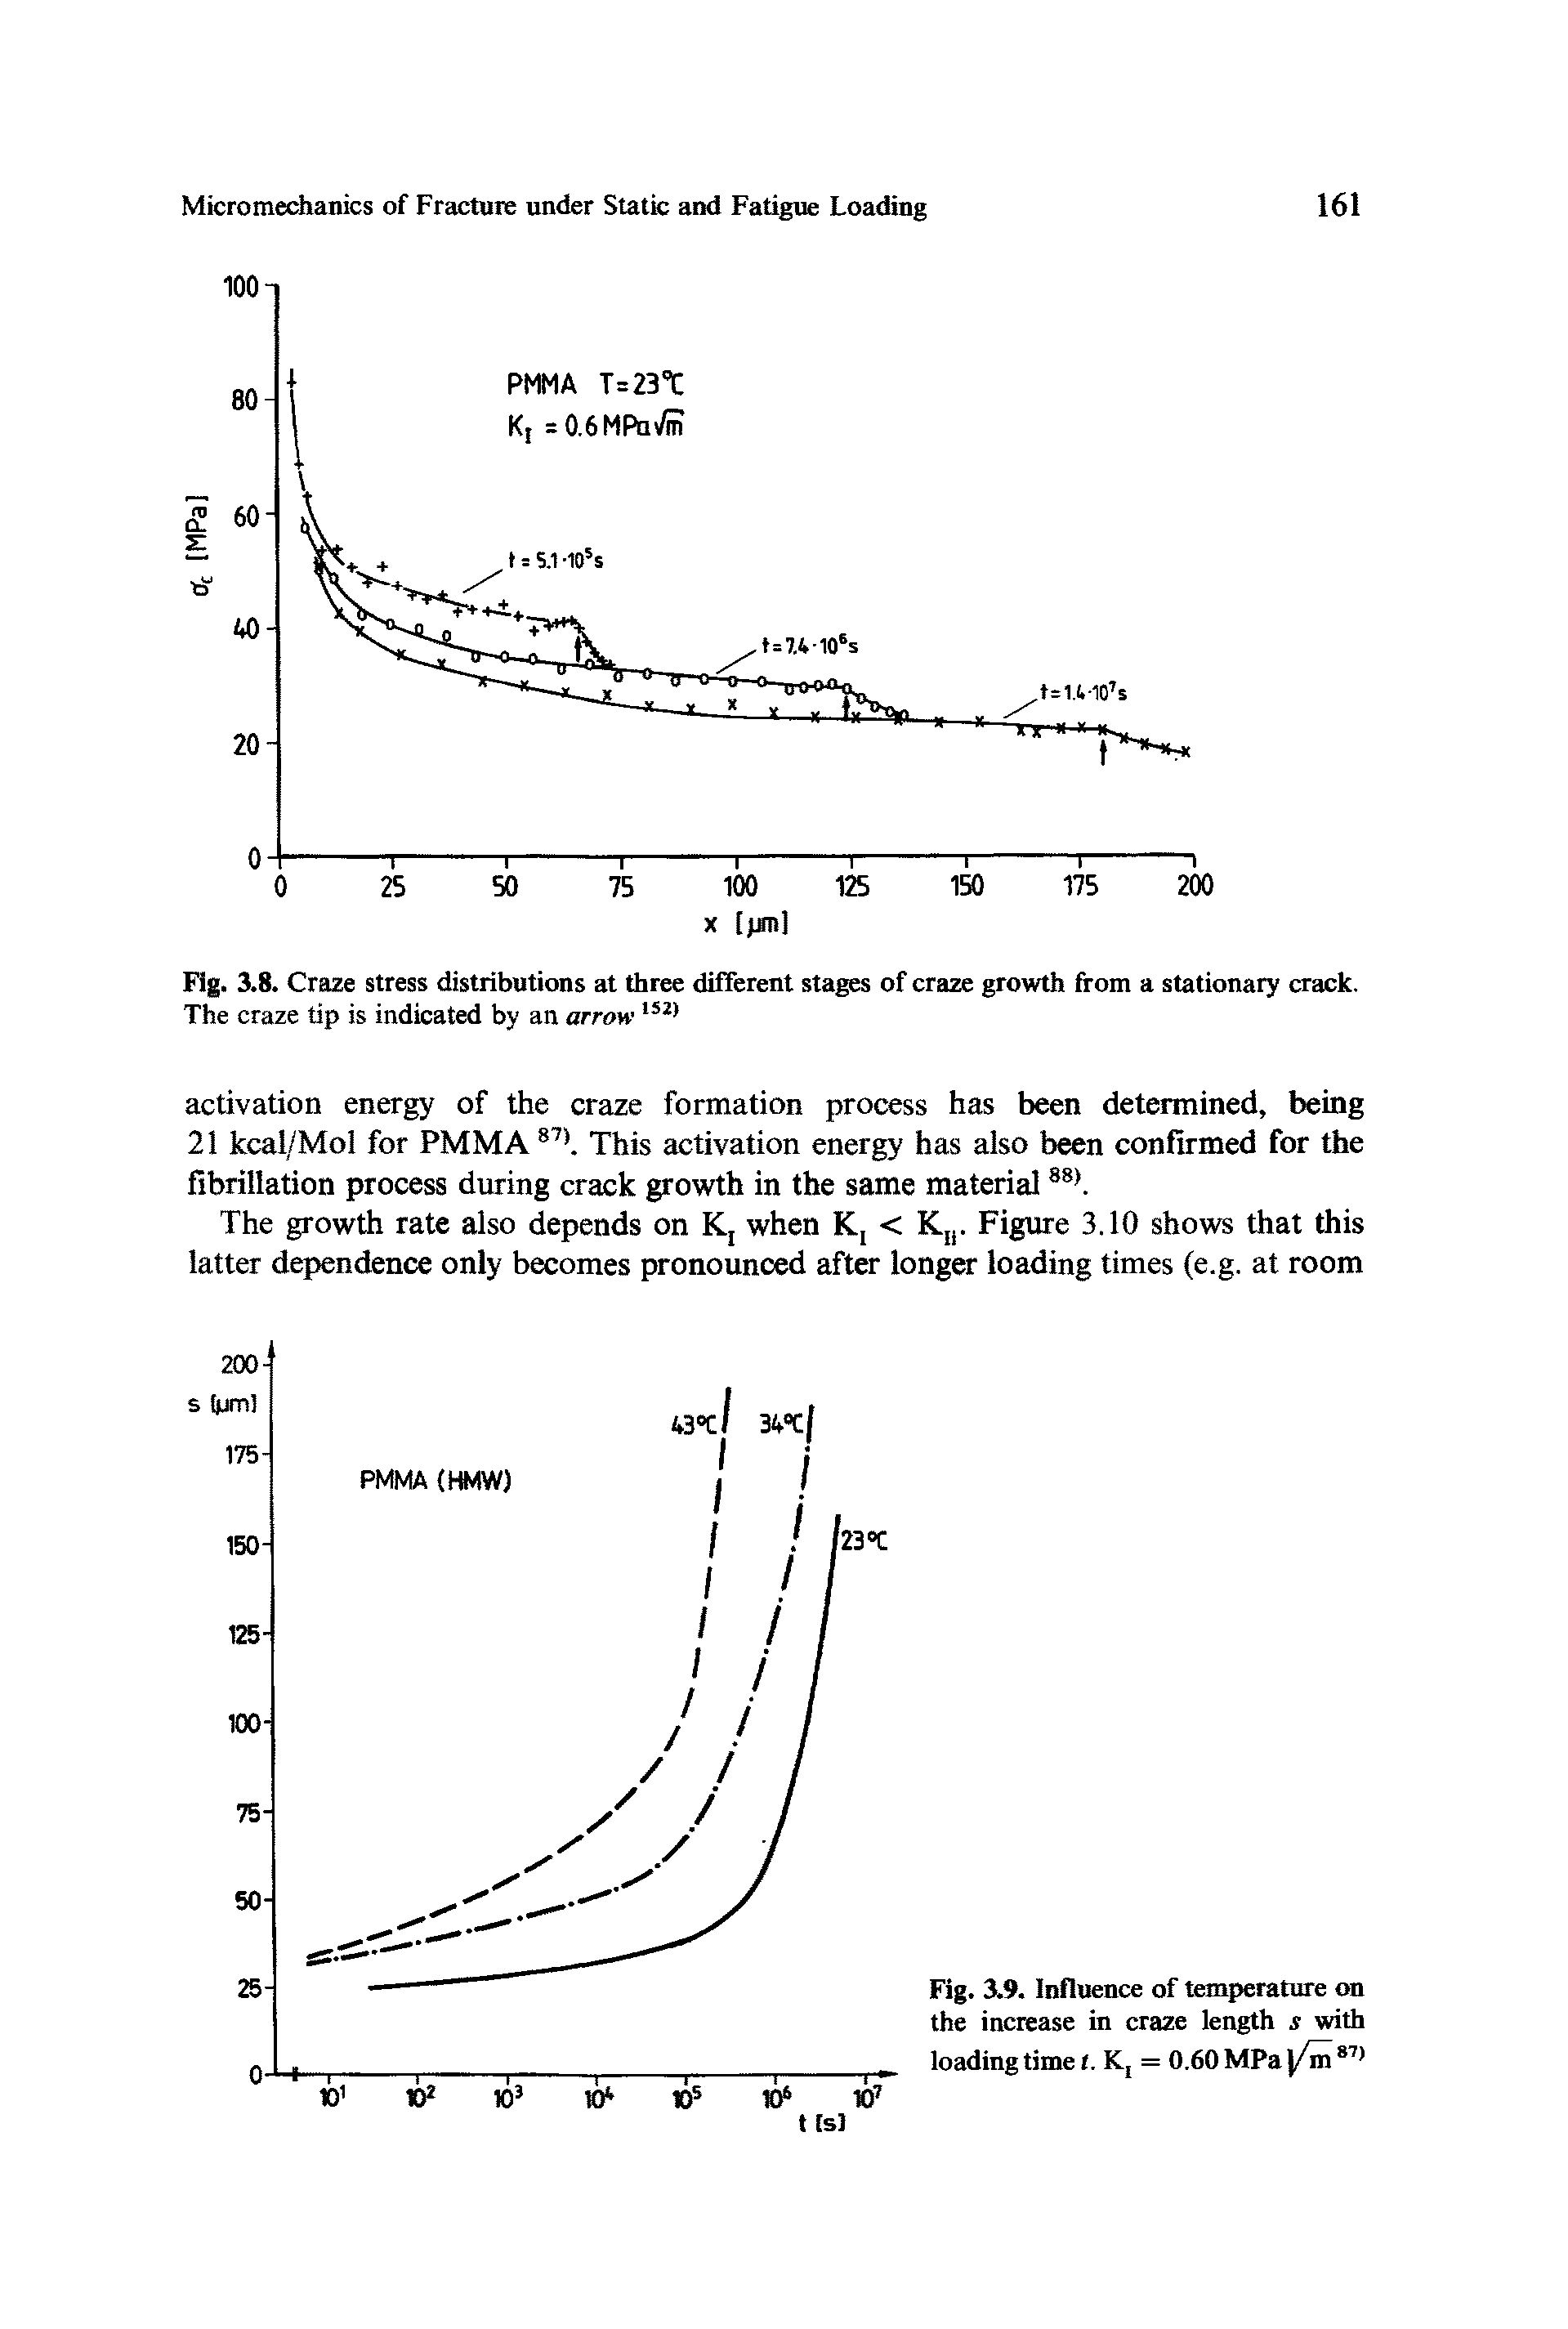 Fig. 3.8. Craze stress distributions at three different stages of craze growth from a stationary crack. The craze tip is indicated by an arrow...